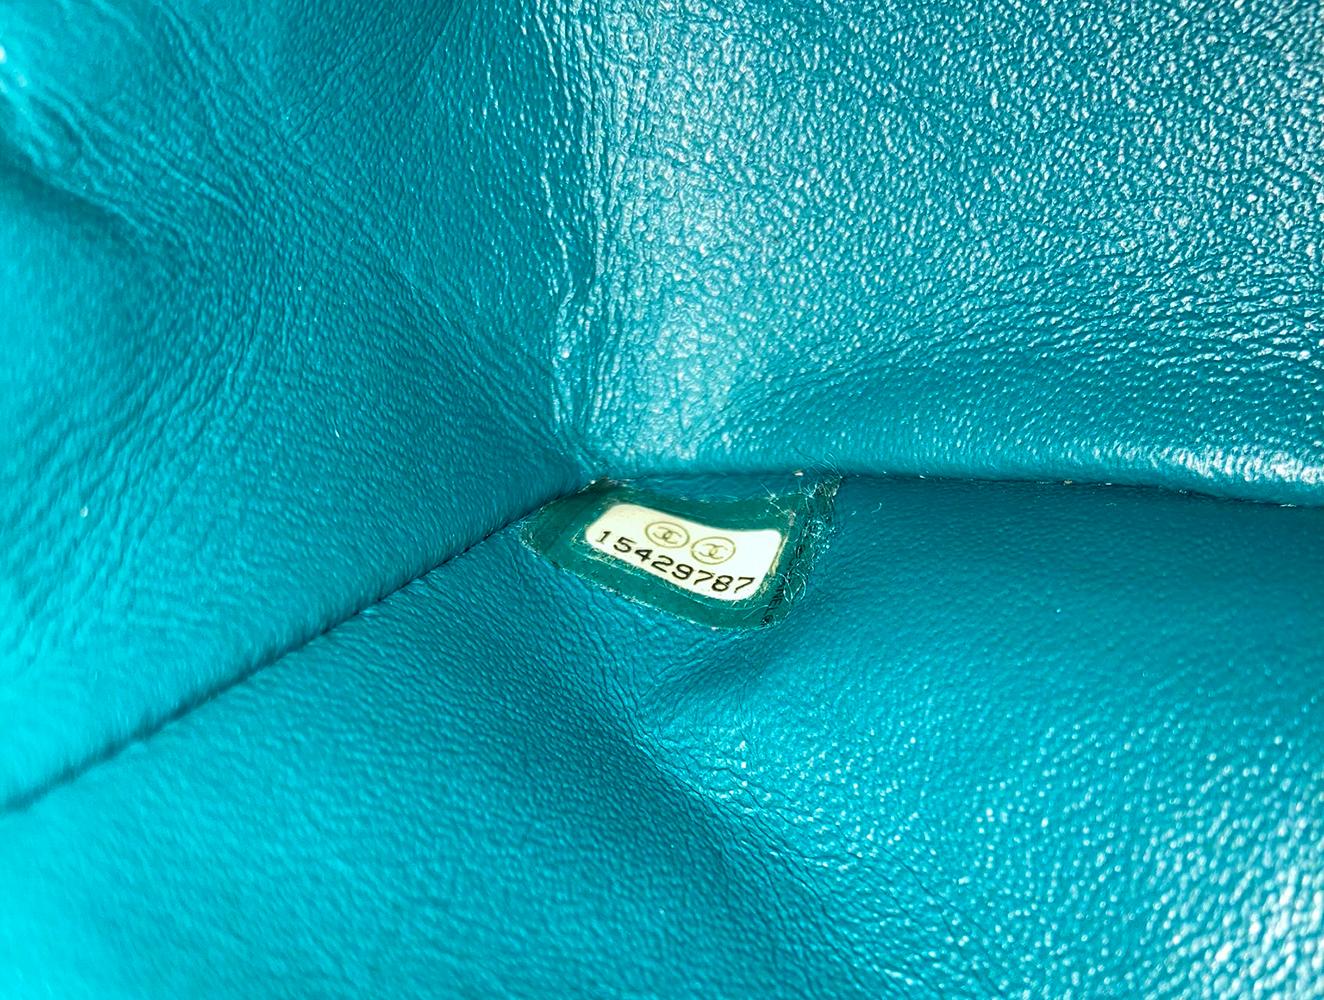 Chanel 2.55 Double Flap Classic Teal Leather Shoulder Bag 3